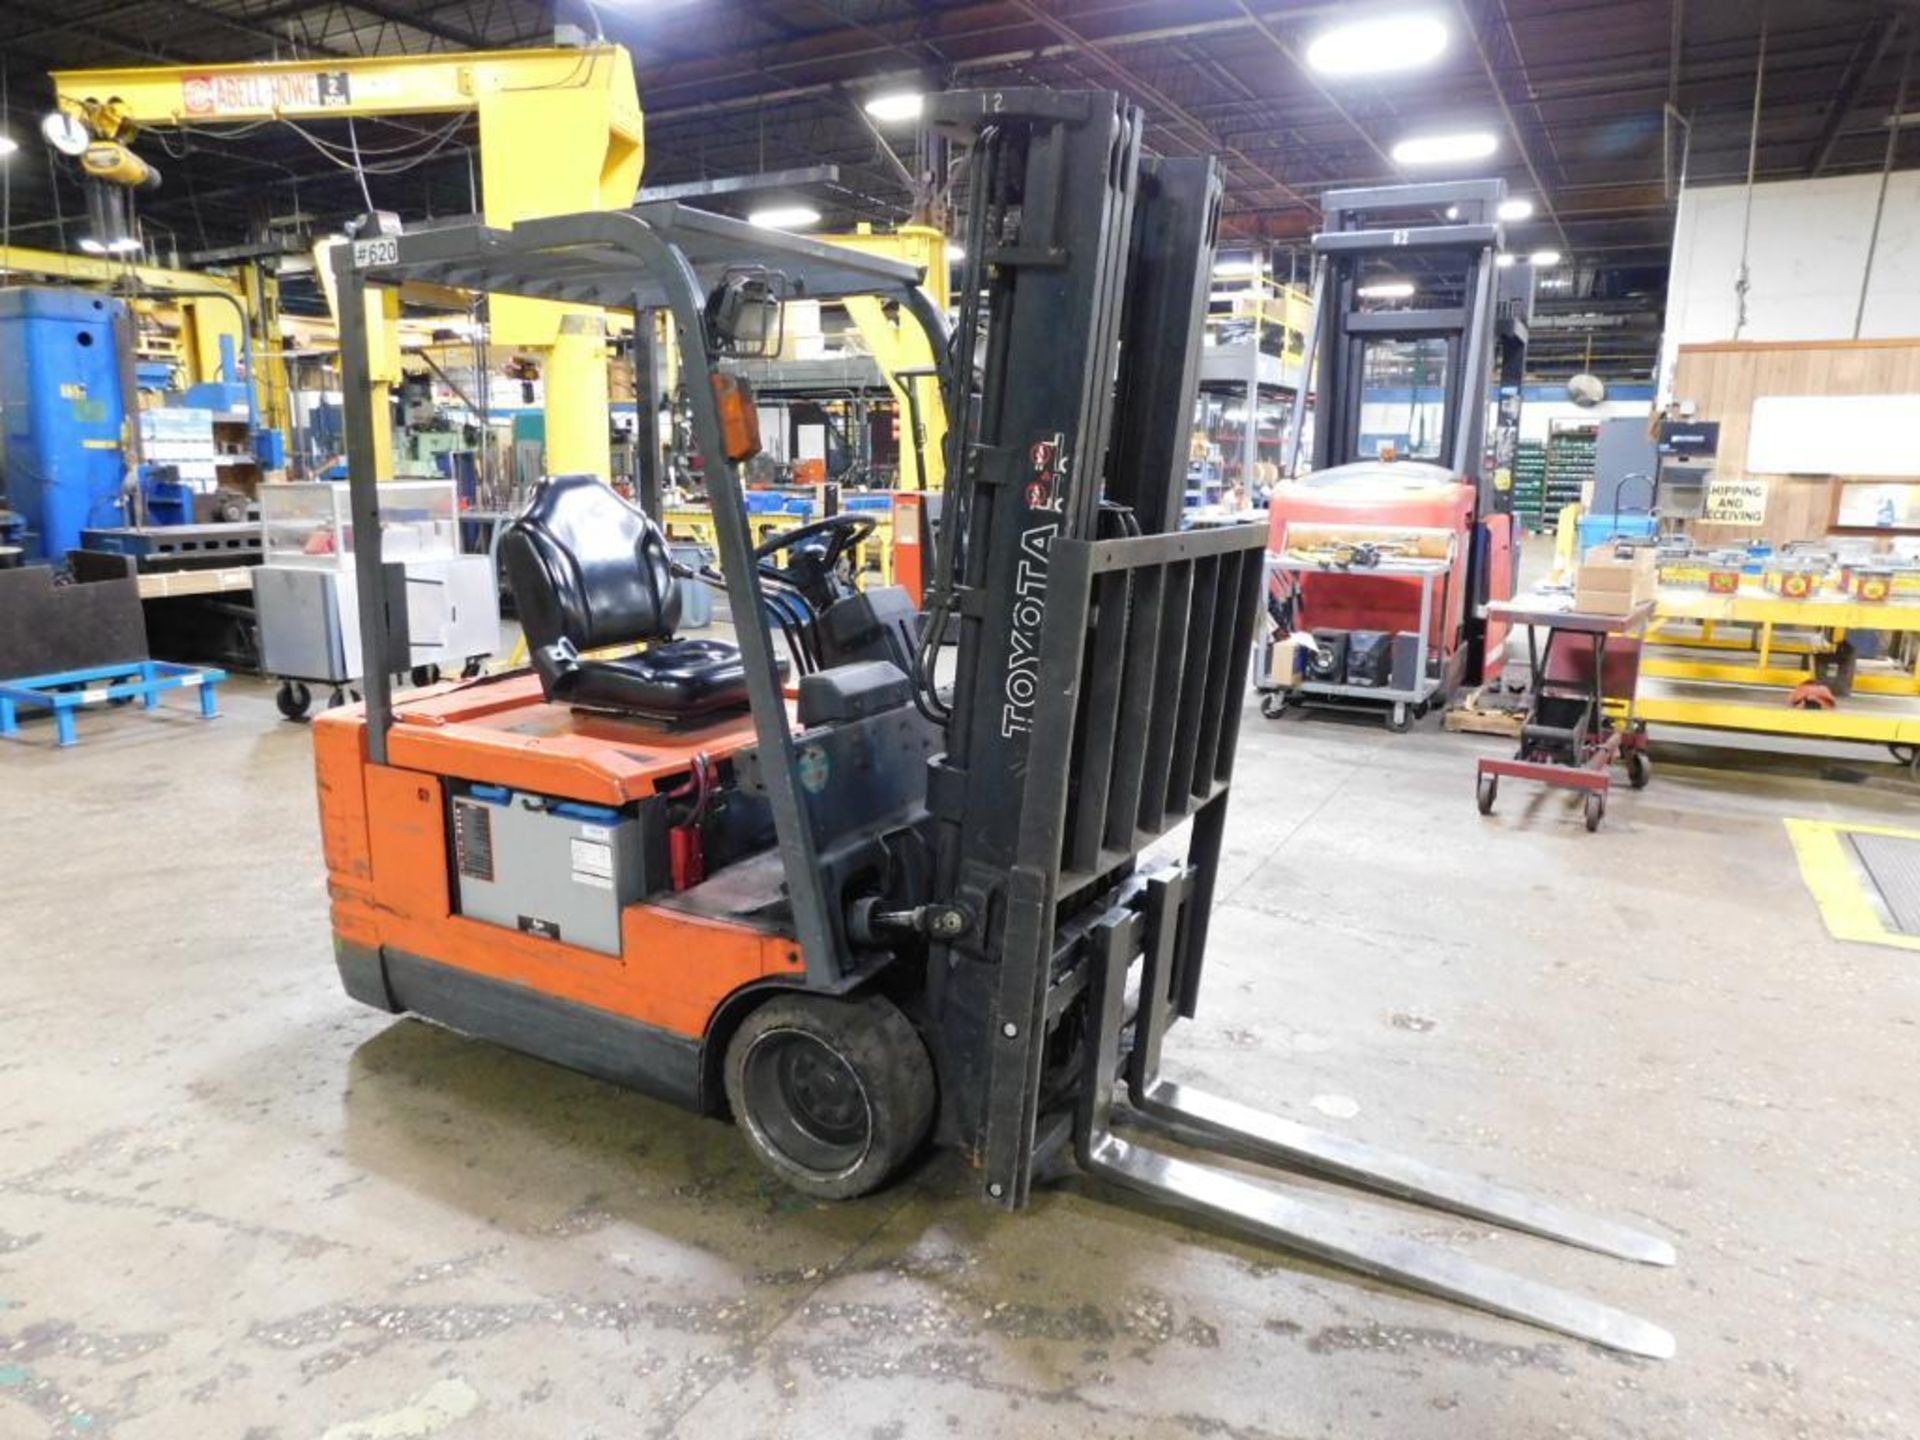 Toyota 3,450 Lb. Electric Forklift Model 5FBE20, S/N 10222, Solid Tires, 189" Max Lift Height, 3-Sta - Image 8 of 17